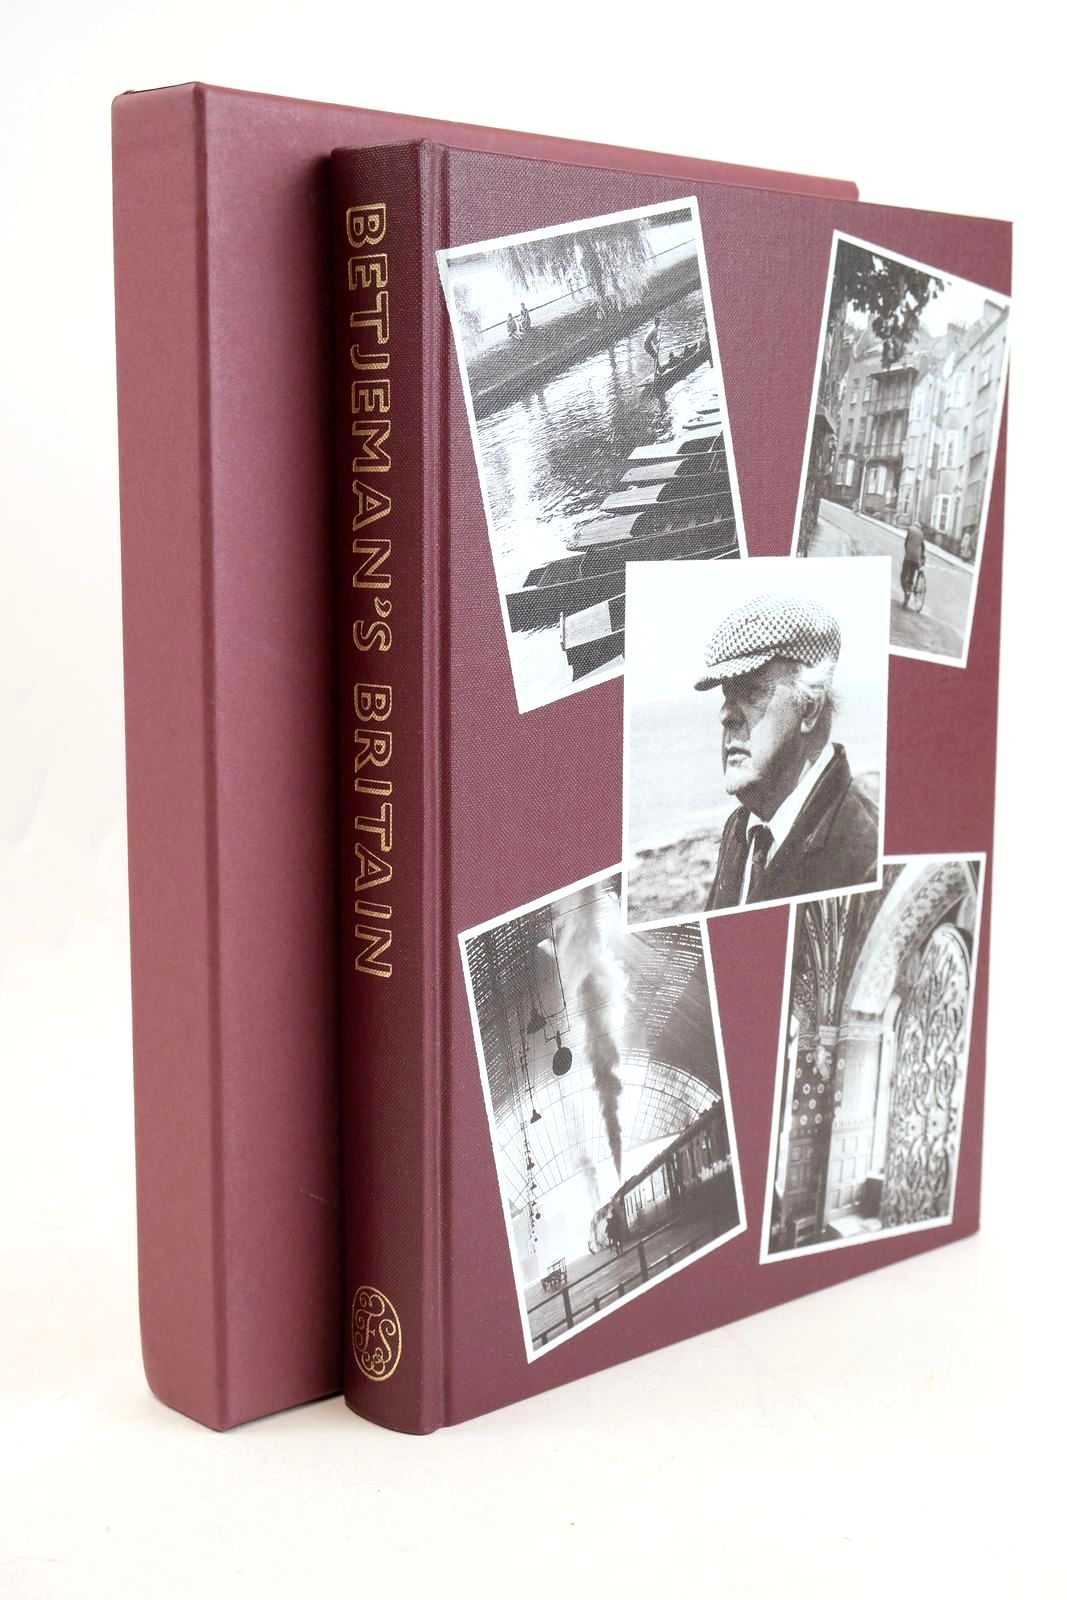 Photo of BETJEMAN'S BRITAIN written by Betjeman, John Green, Candida Lycett published by Folio Society (STOCK CODE: 1327436)  for sale by Stella & Rose's Books